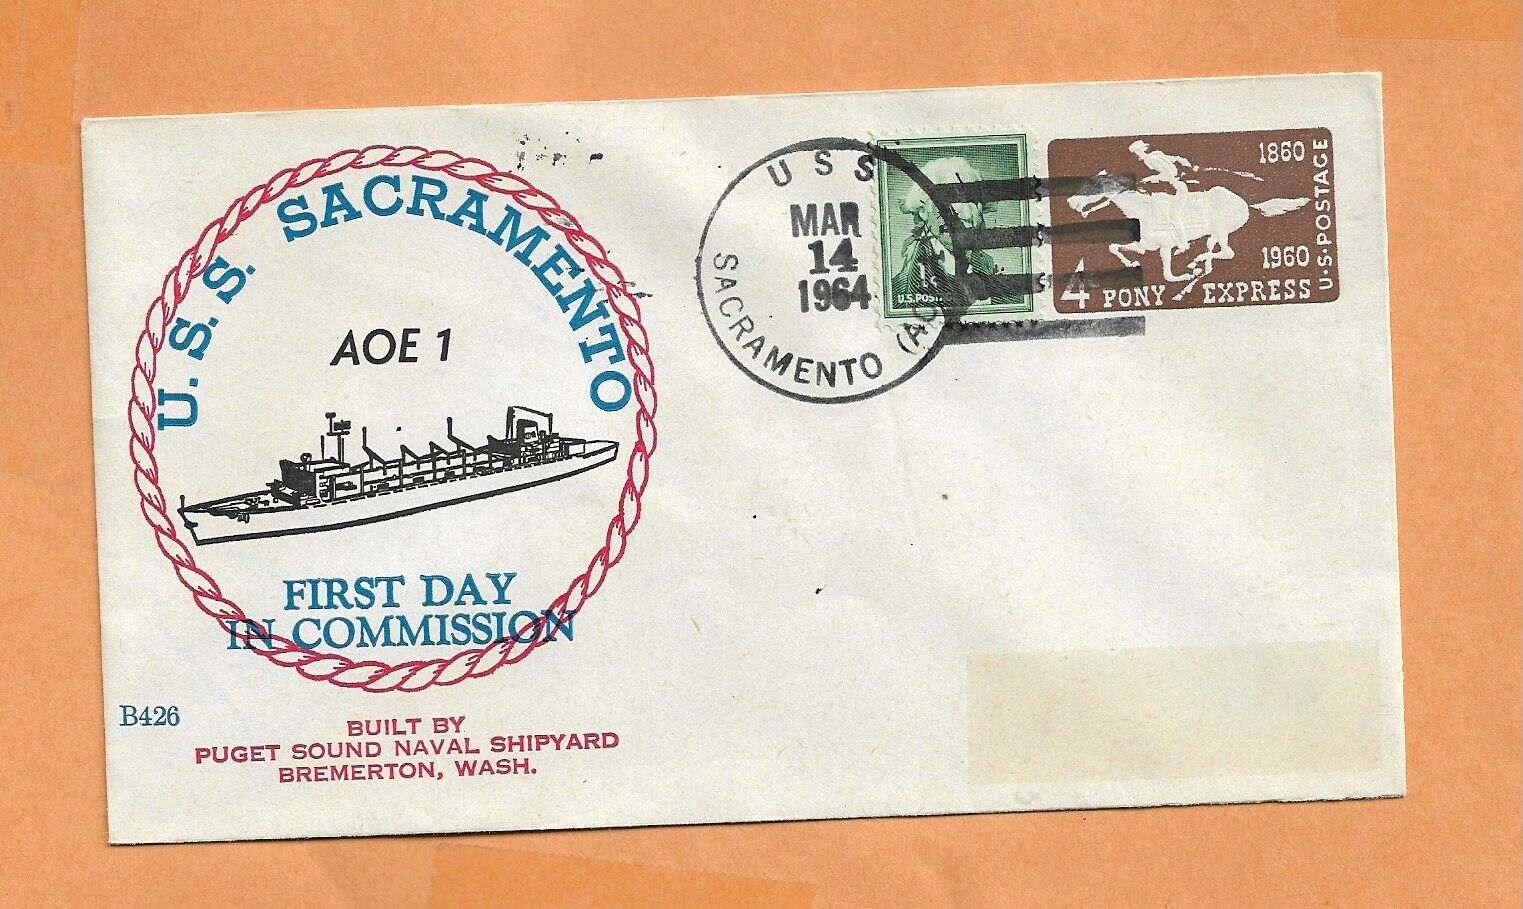 U.S.S.  SACRAMENTA FIRST DAY IN COMMISSION MAR 14,1964 BECK B426  NAVAL COVER